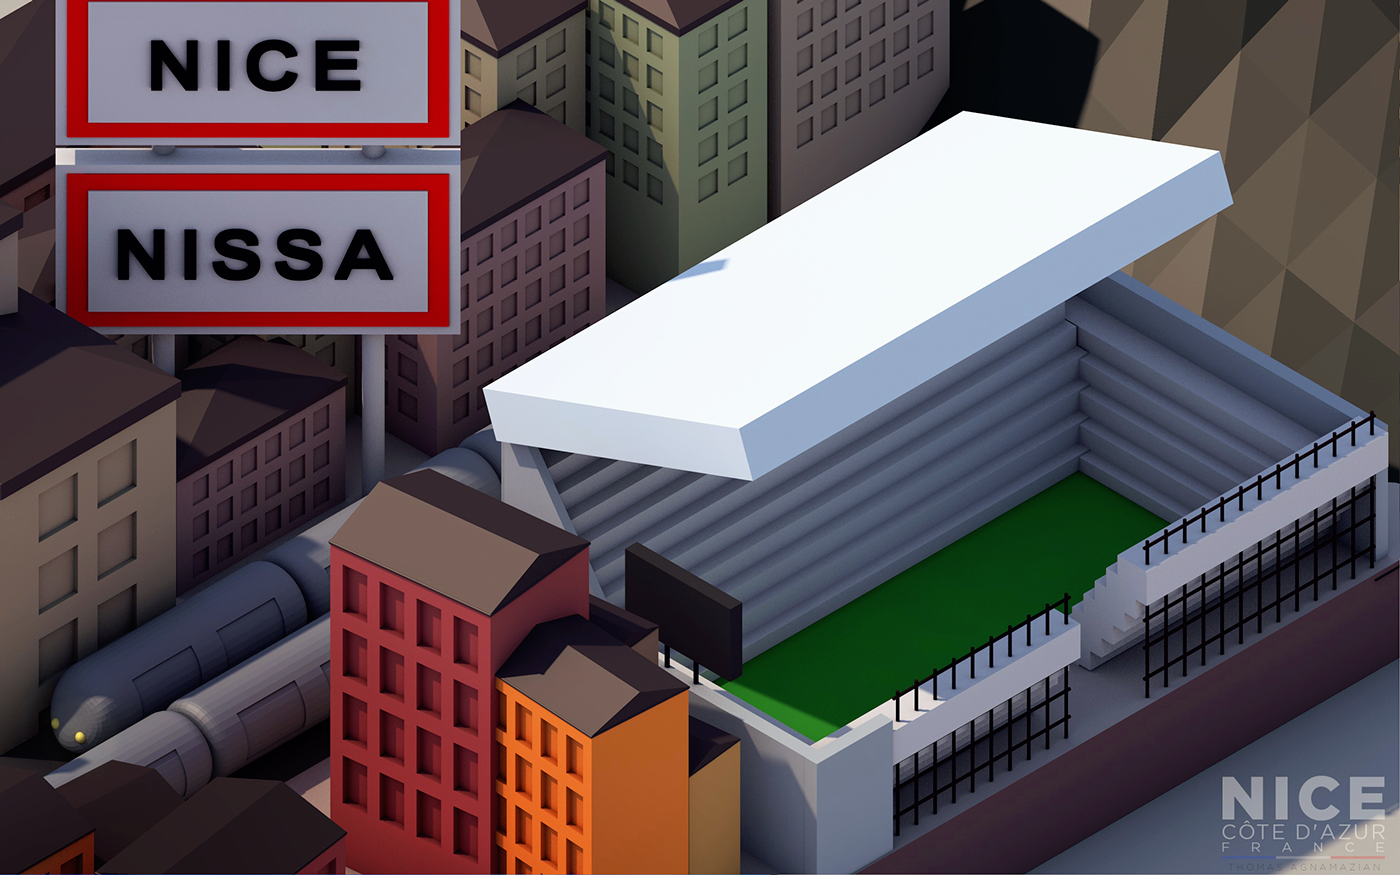 cinema4d 4d 3D nice nissa france cote d'azur French Riviera design motion Low Poly LOW poly isometri